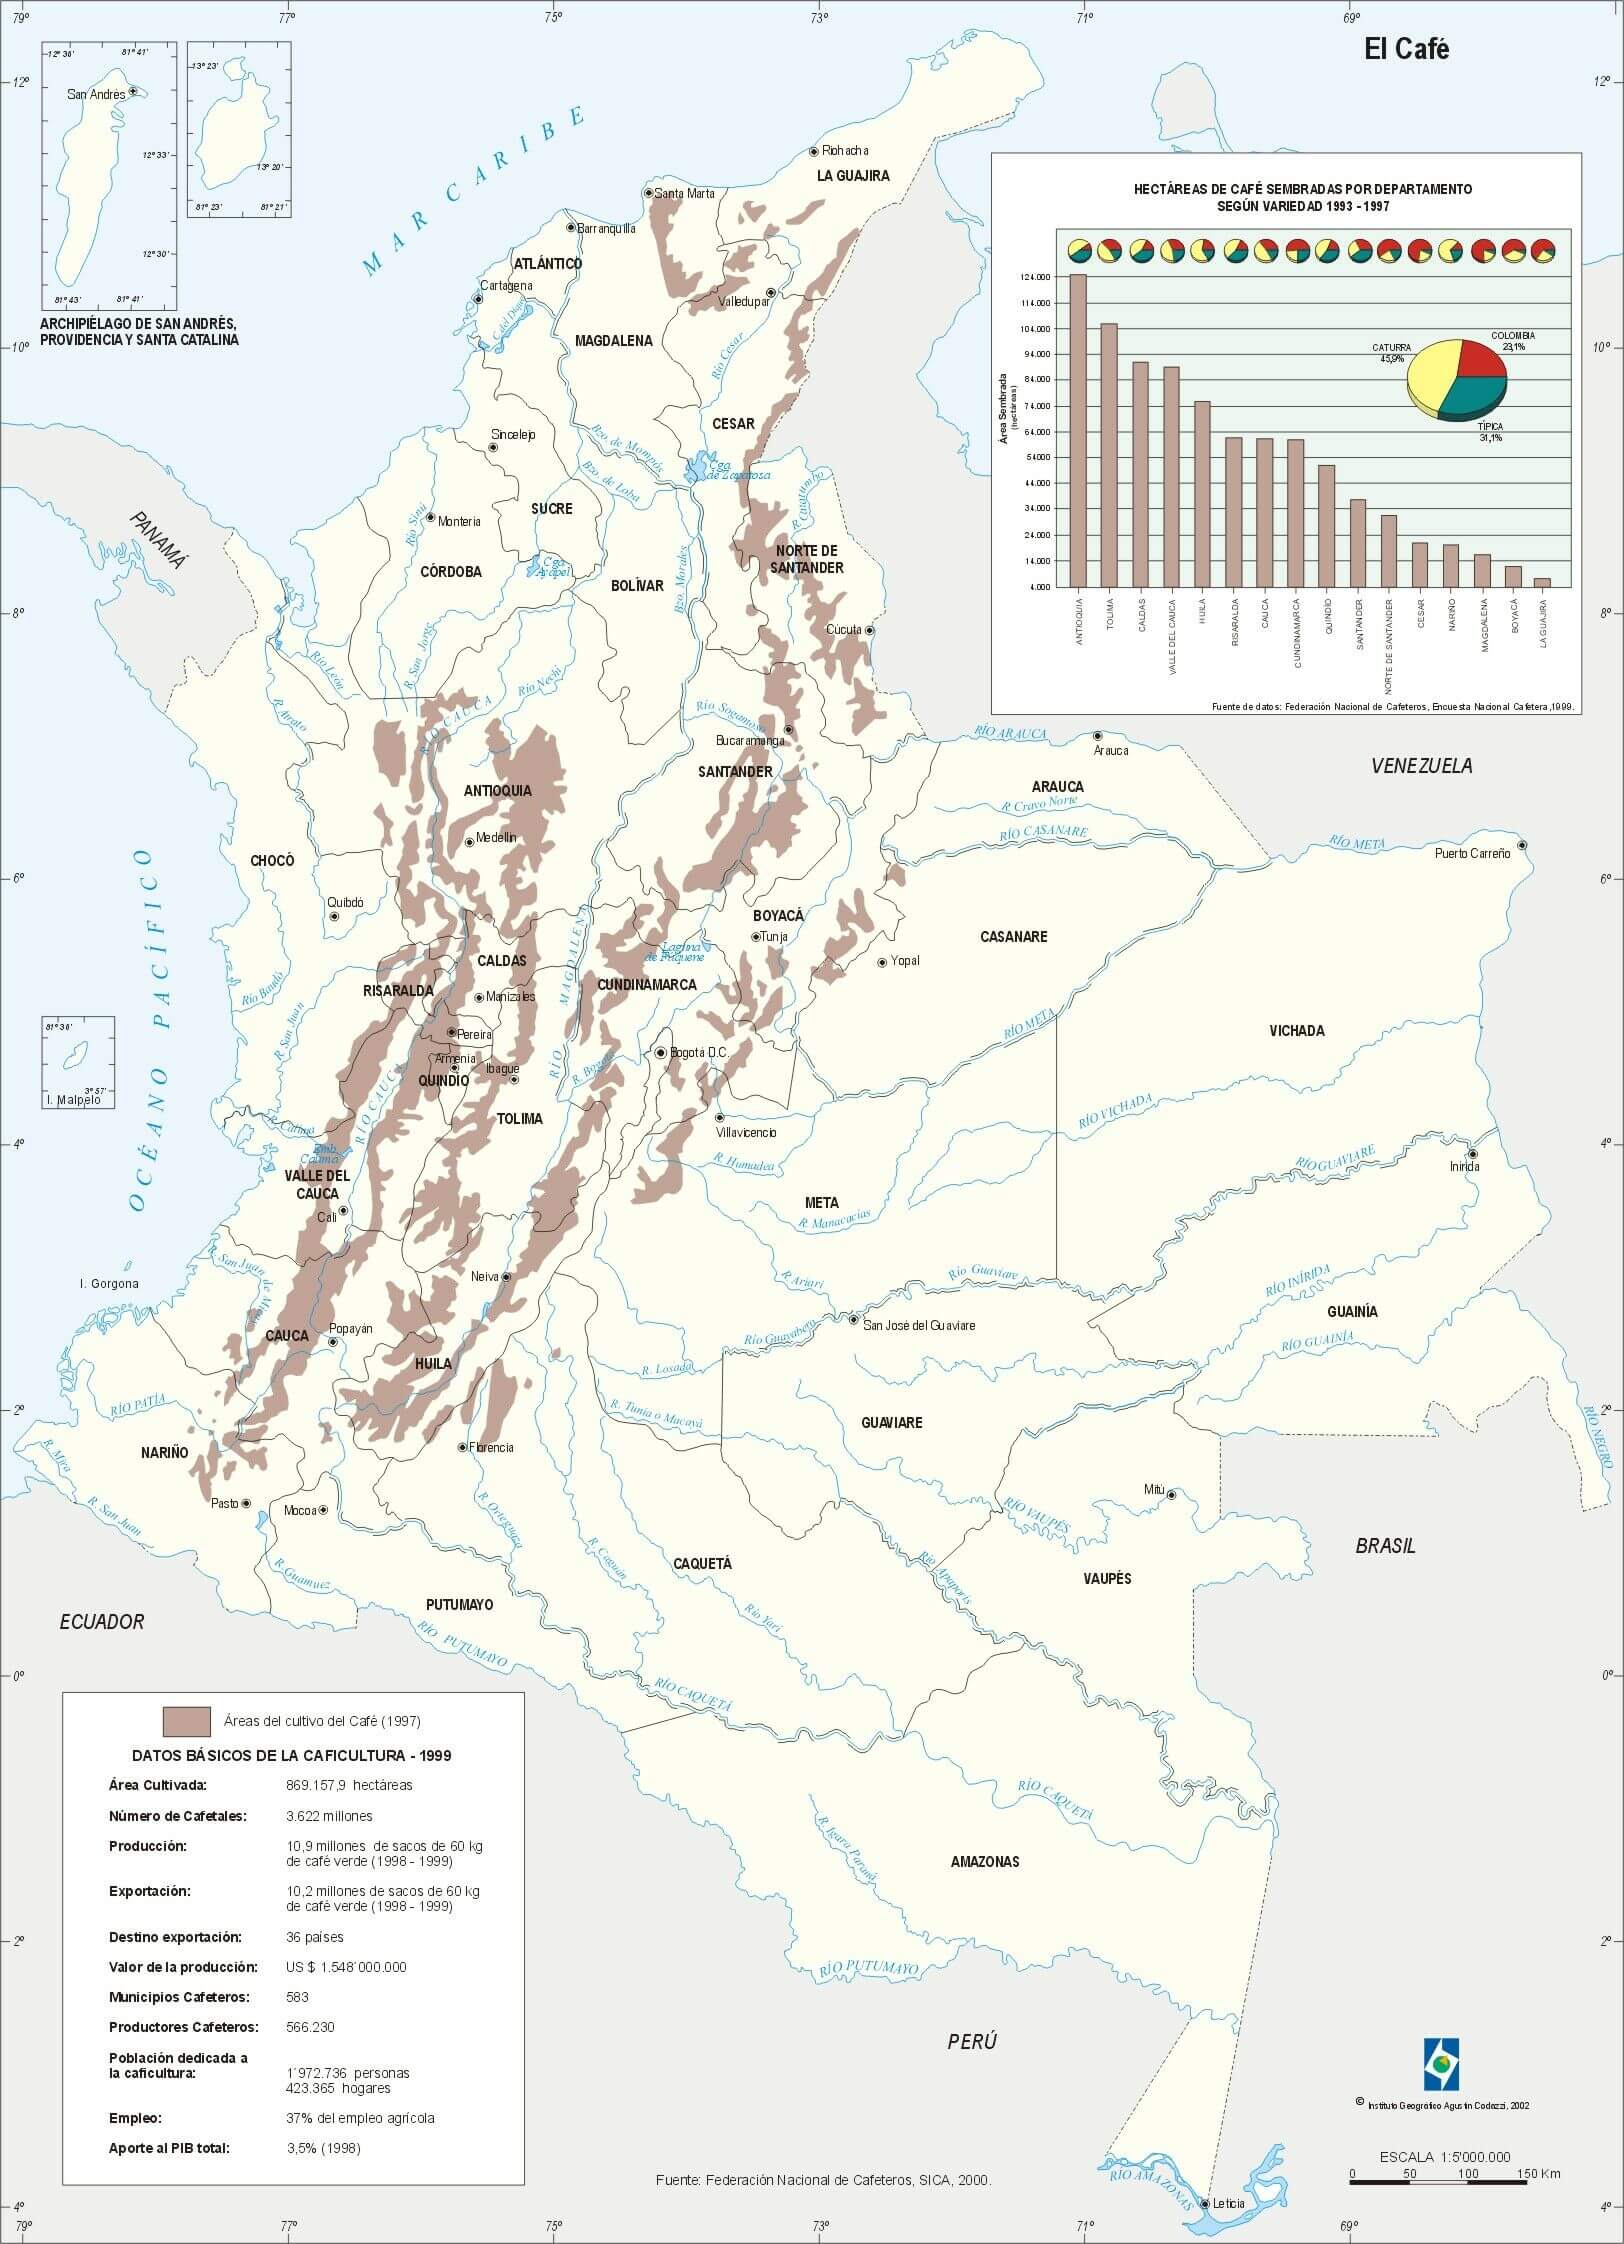 Coffee Usage Map in Colombia 2002